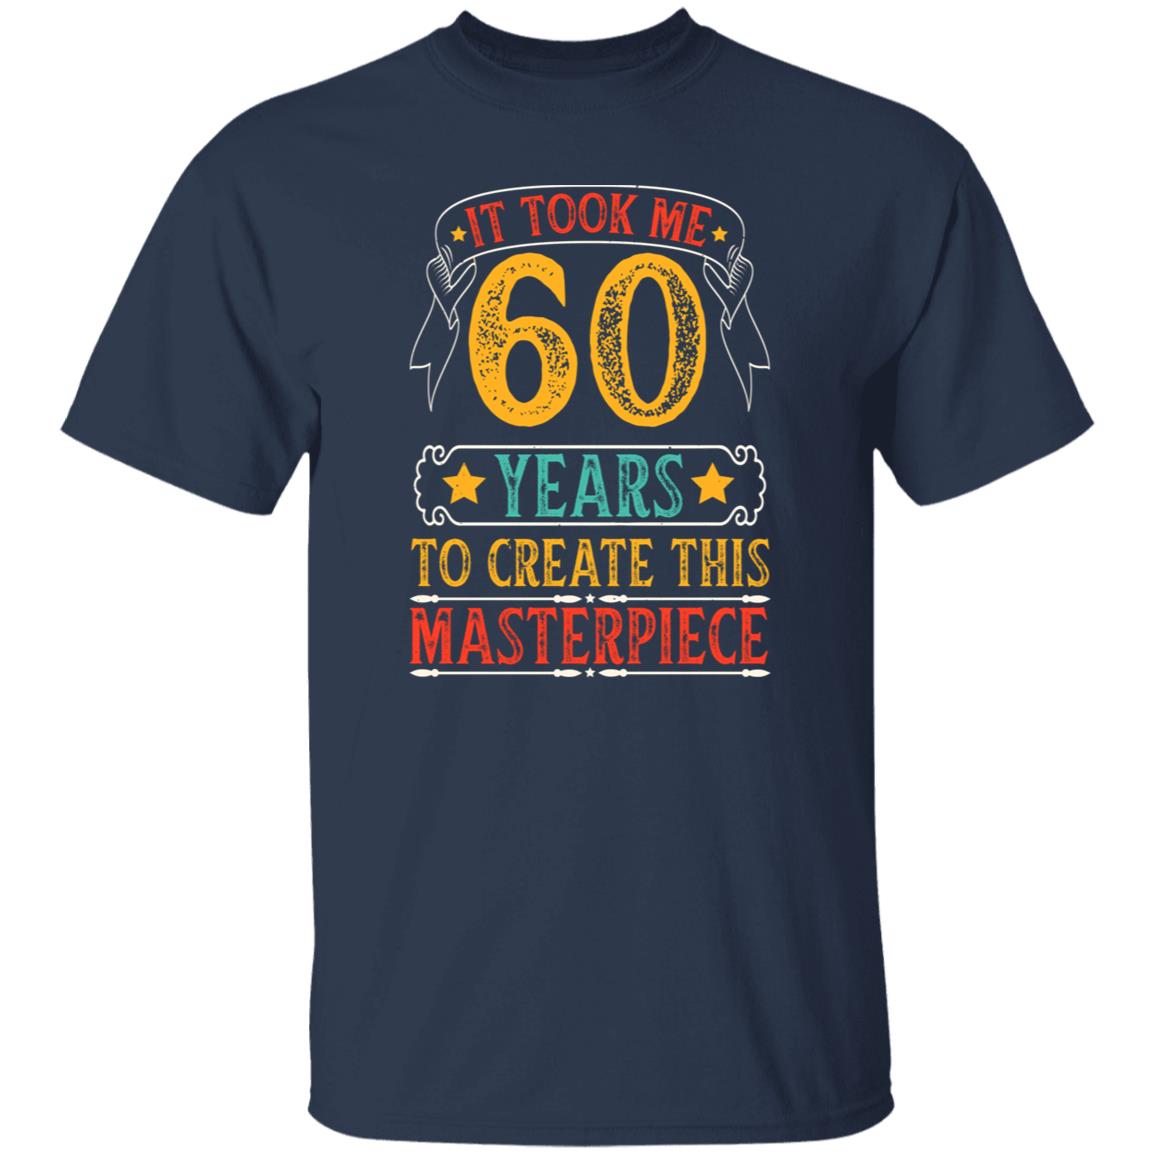 Personalized Birthday Gift - It Took Me Years To Create This Masterpiece Funny Shirt